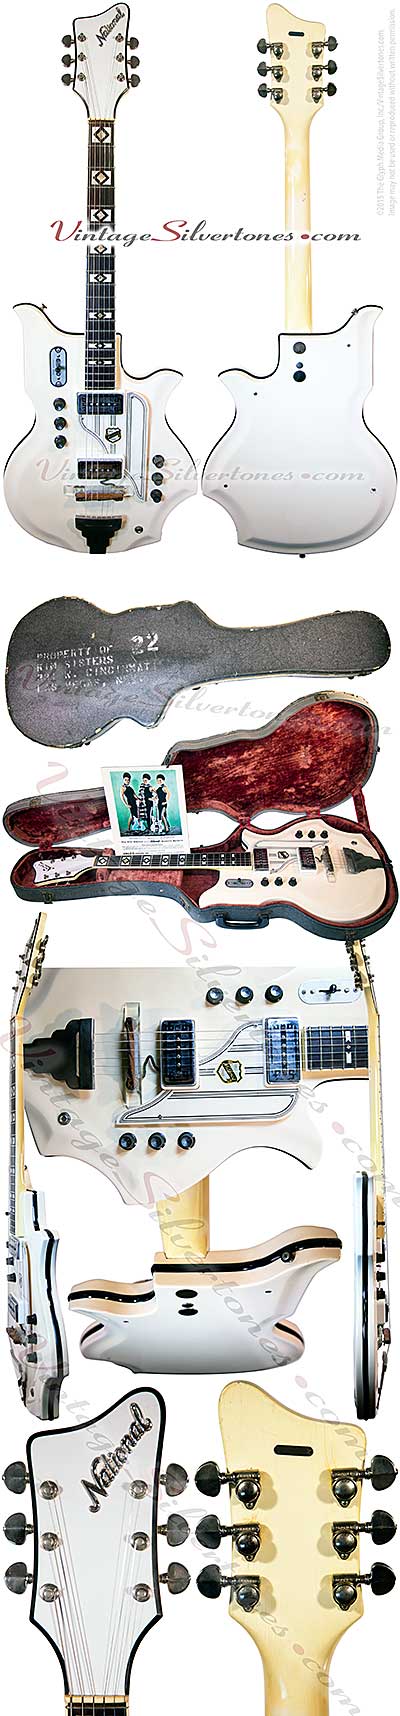 National Glenwood Val-Pro 99- electric guitar 3 pickups, made in Chicago 1962 res-o-glass